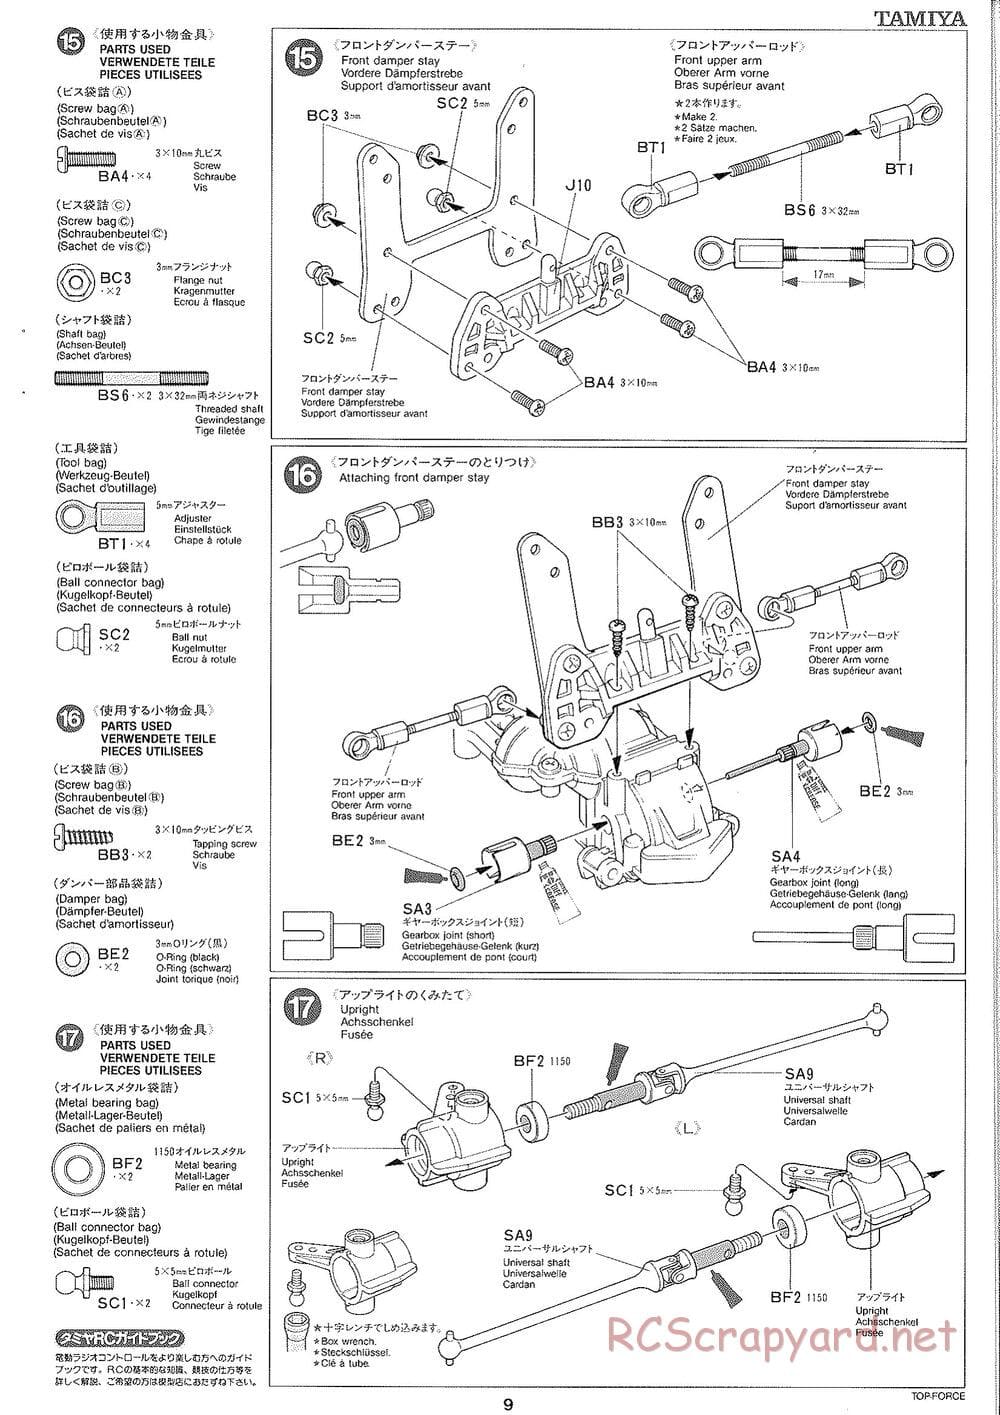 Tamiya - Top Force 2005 - DF-01 Chassis - Manual - Page 9